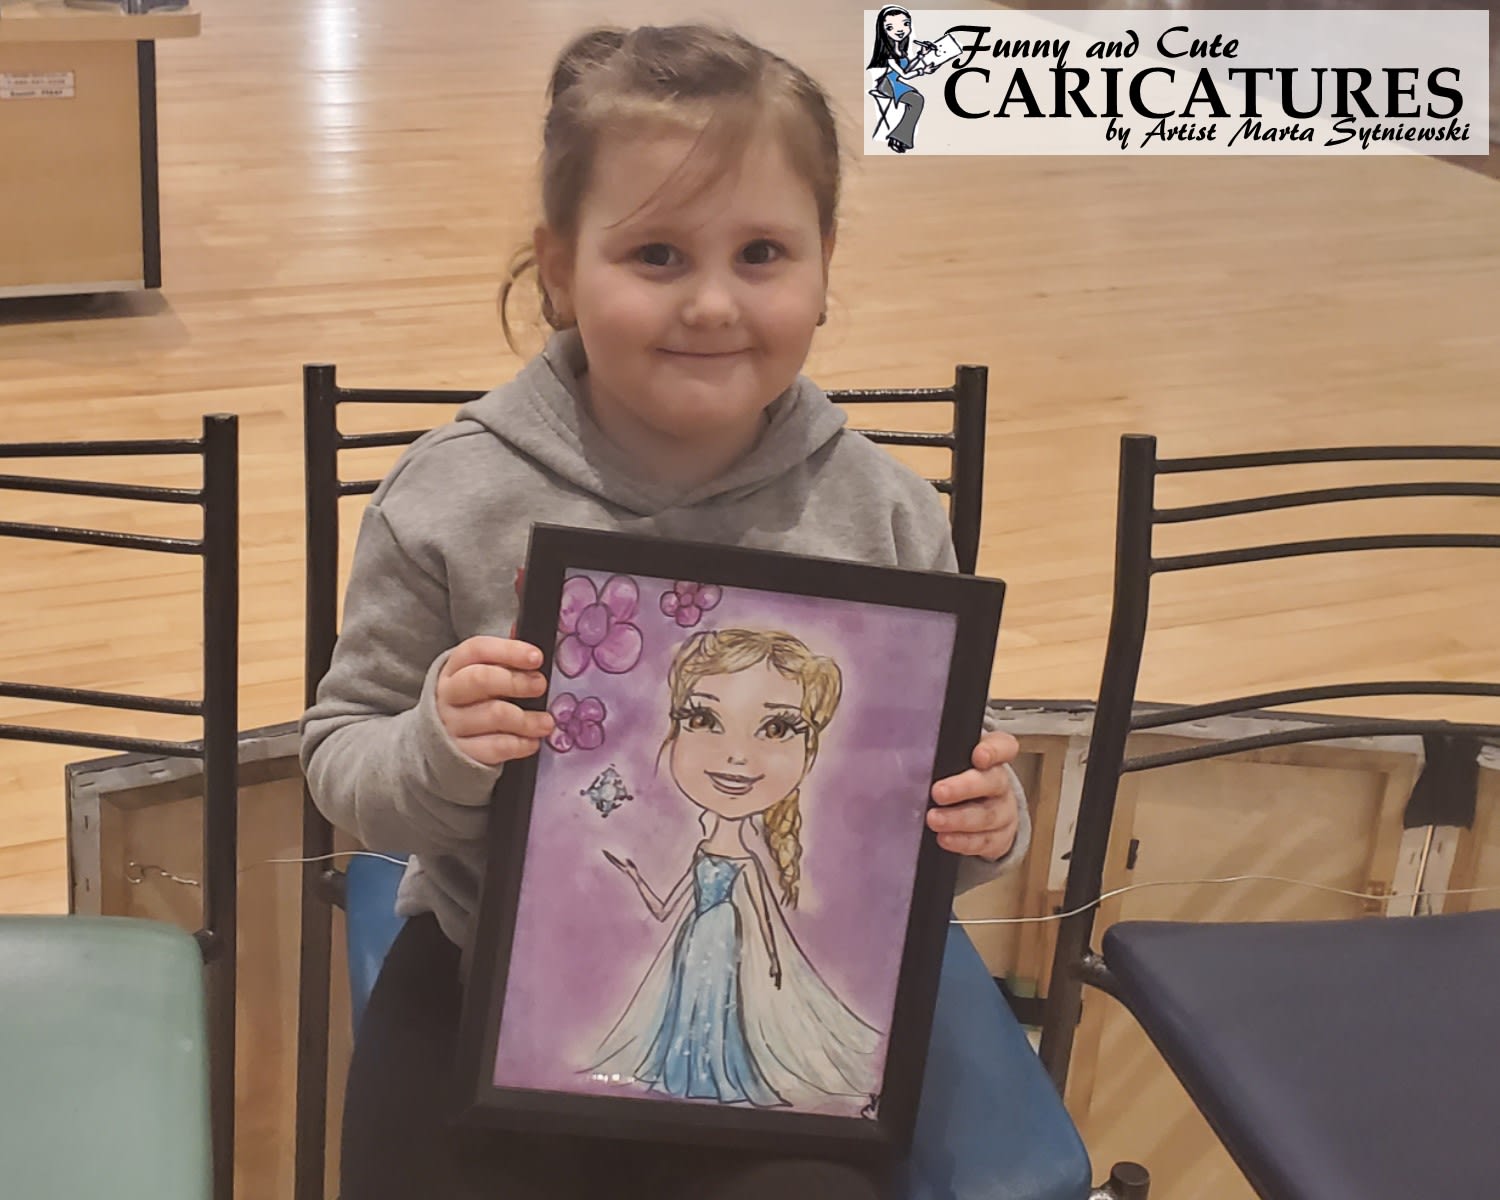 Learn How to Draw Elsa from Frozen (Frozen) Step by Step : Drawing Tutorials